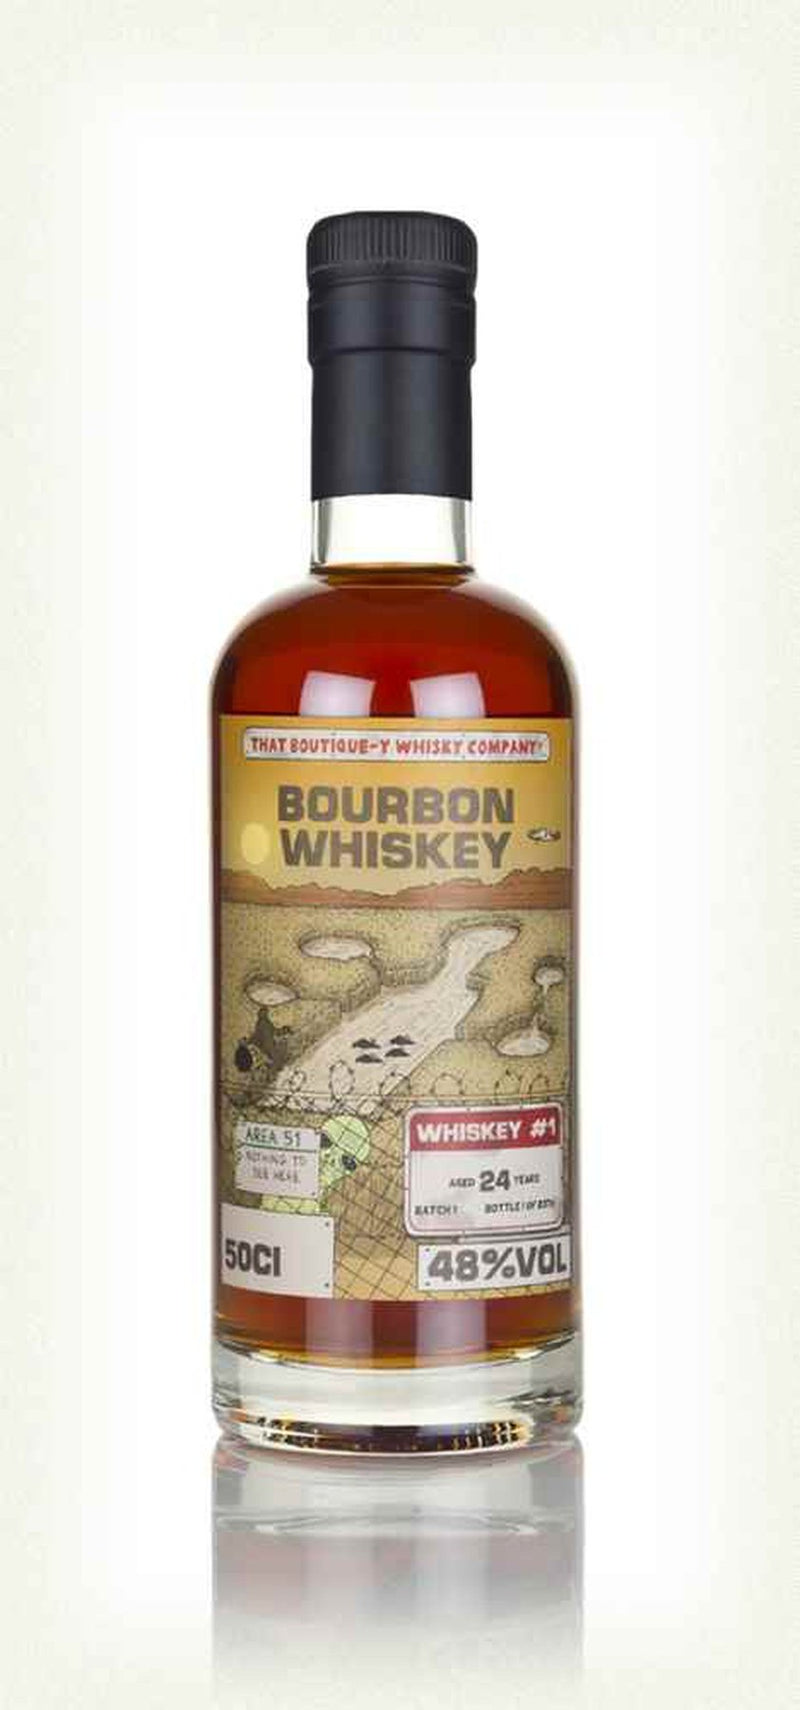 That Boutique-y Whisky Company Bourbon